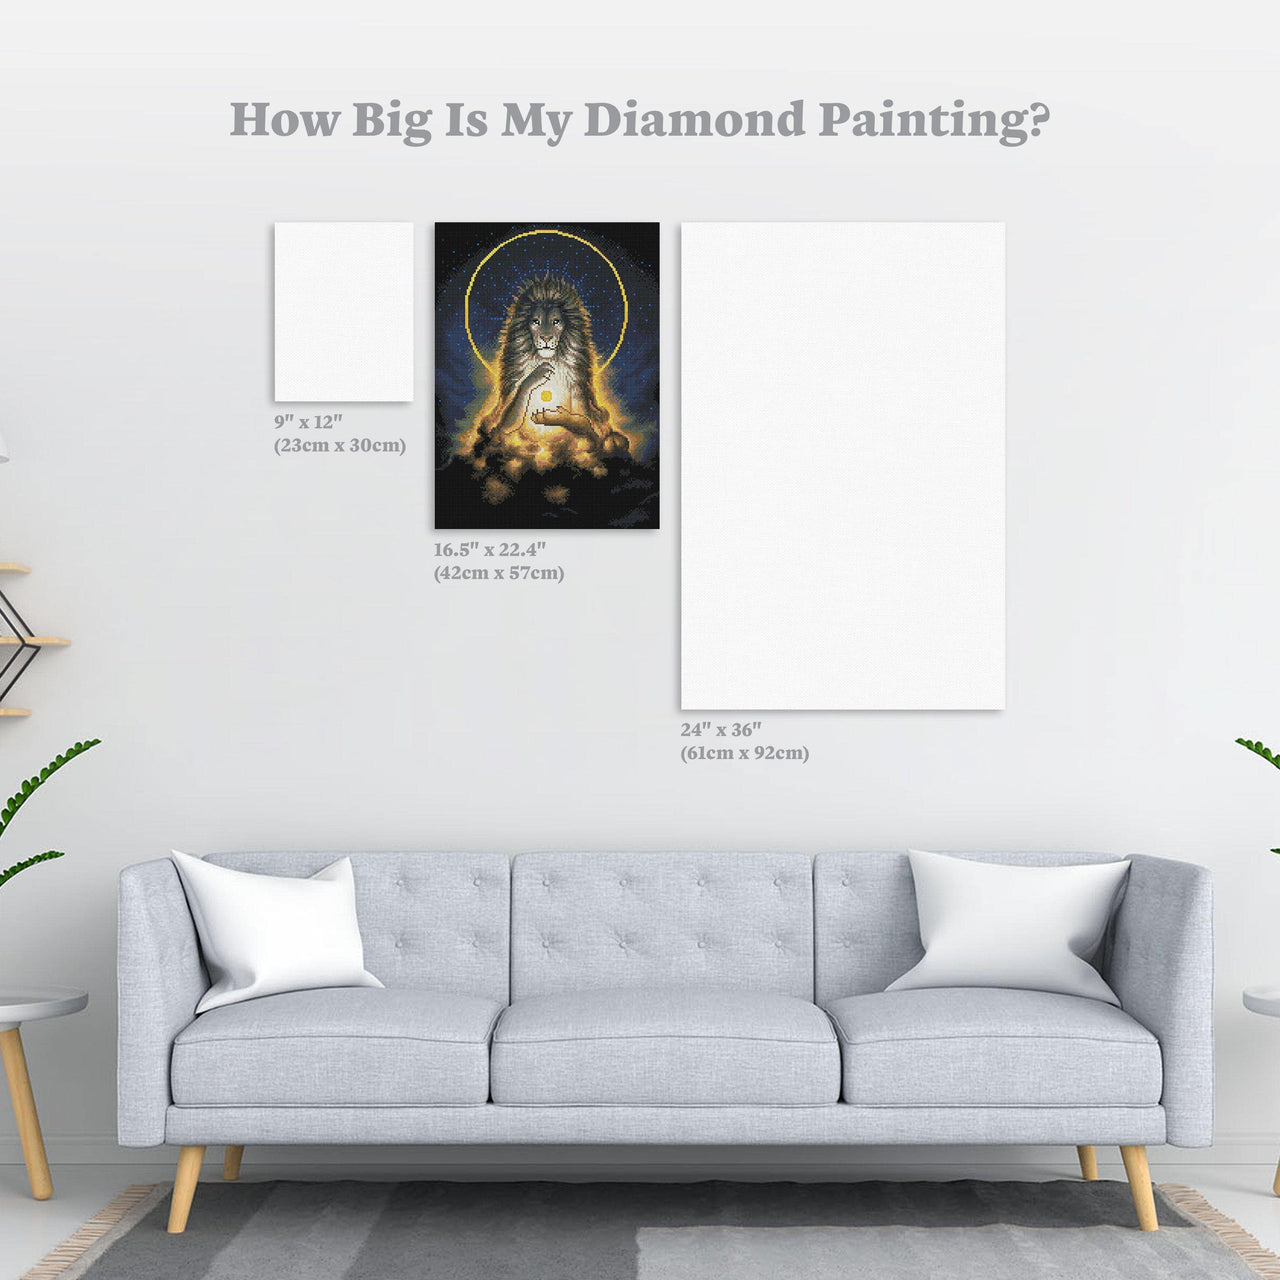 Diamond Painting Soul Keeper 16.5" x 22.4" (42cm x 57cm) / Round With 28 Colors Including 1 AB / 29,895